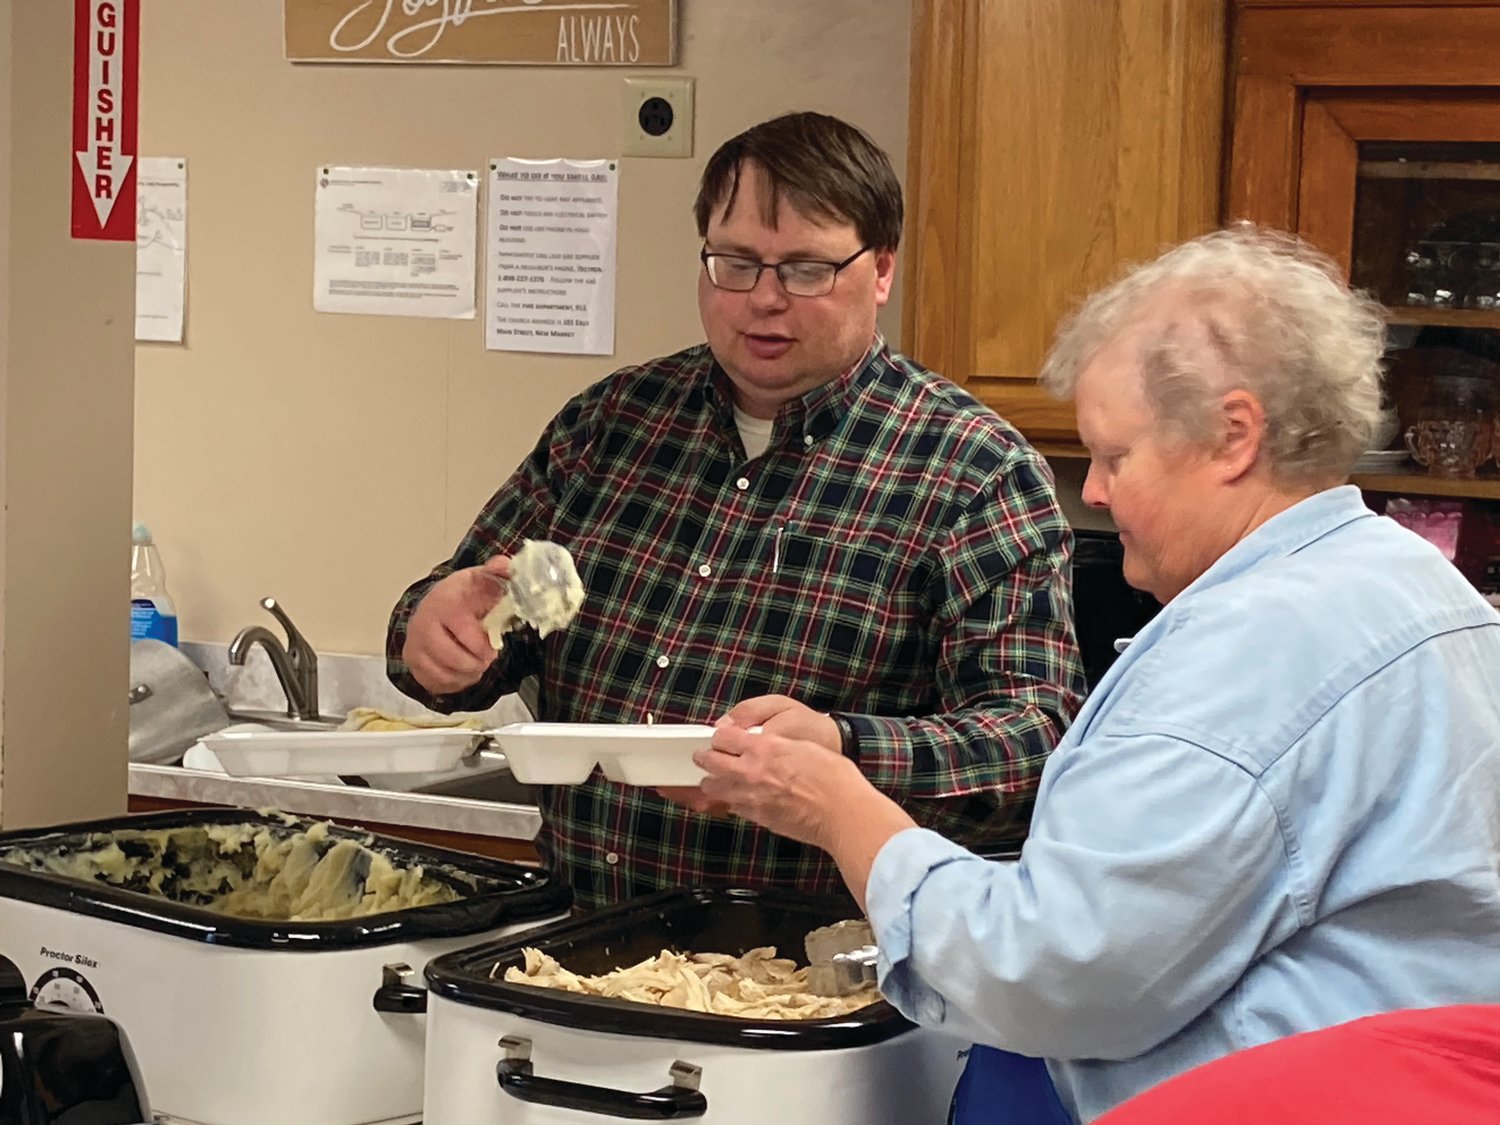 Pastor Bill Pike scoops mashed potatoes Saturday onto a tray held by Ladonna Howard at New Market United Methodist Church